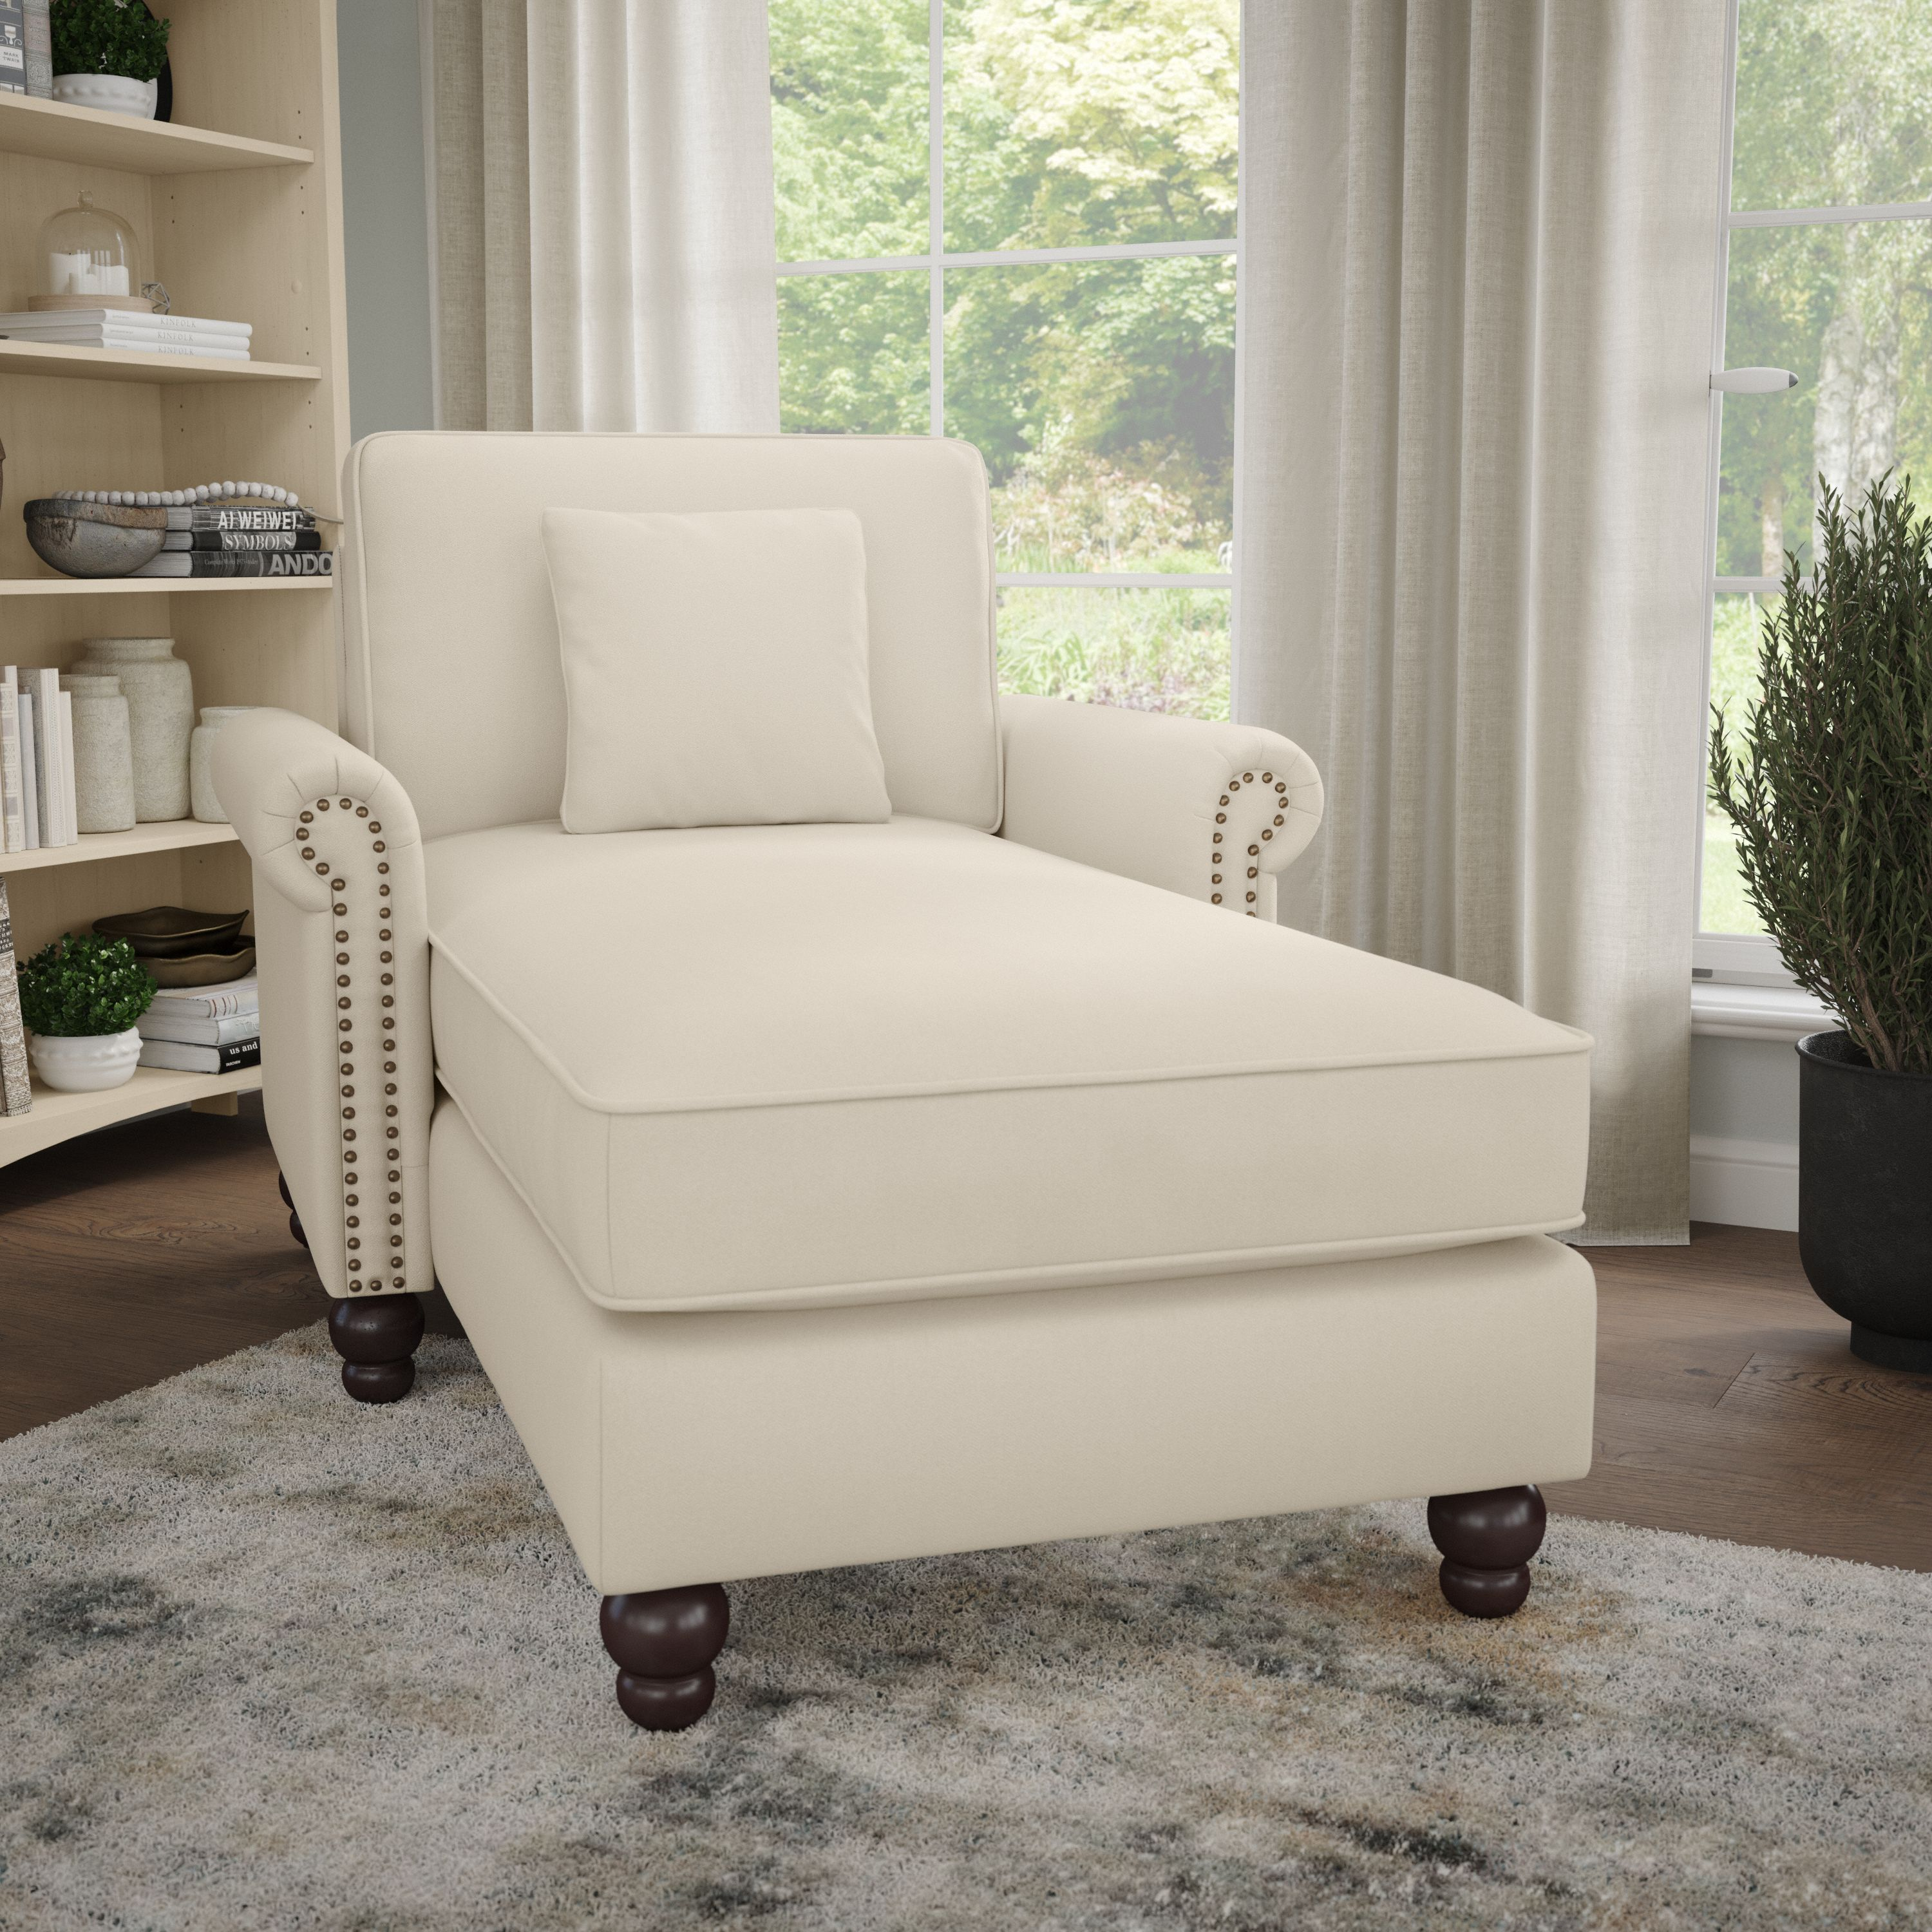 Shop Bush Furniture Coventry Chaise Lounge with Arms 01 CVM41BCRH-03K #color_cream herringbone fabric